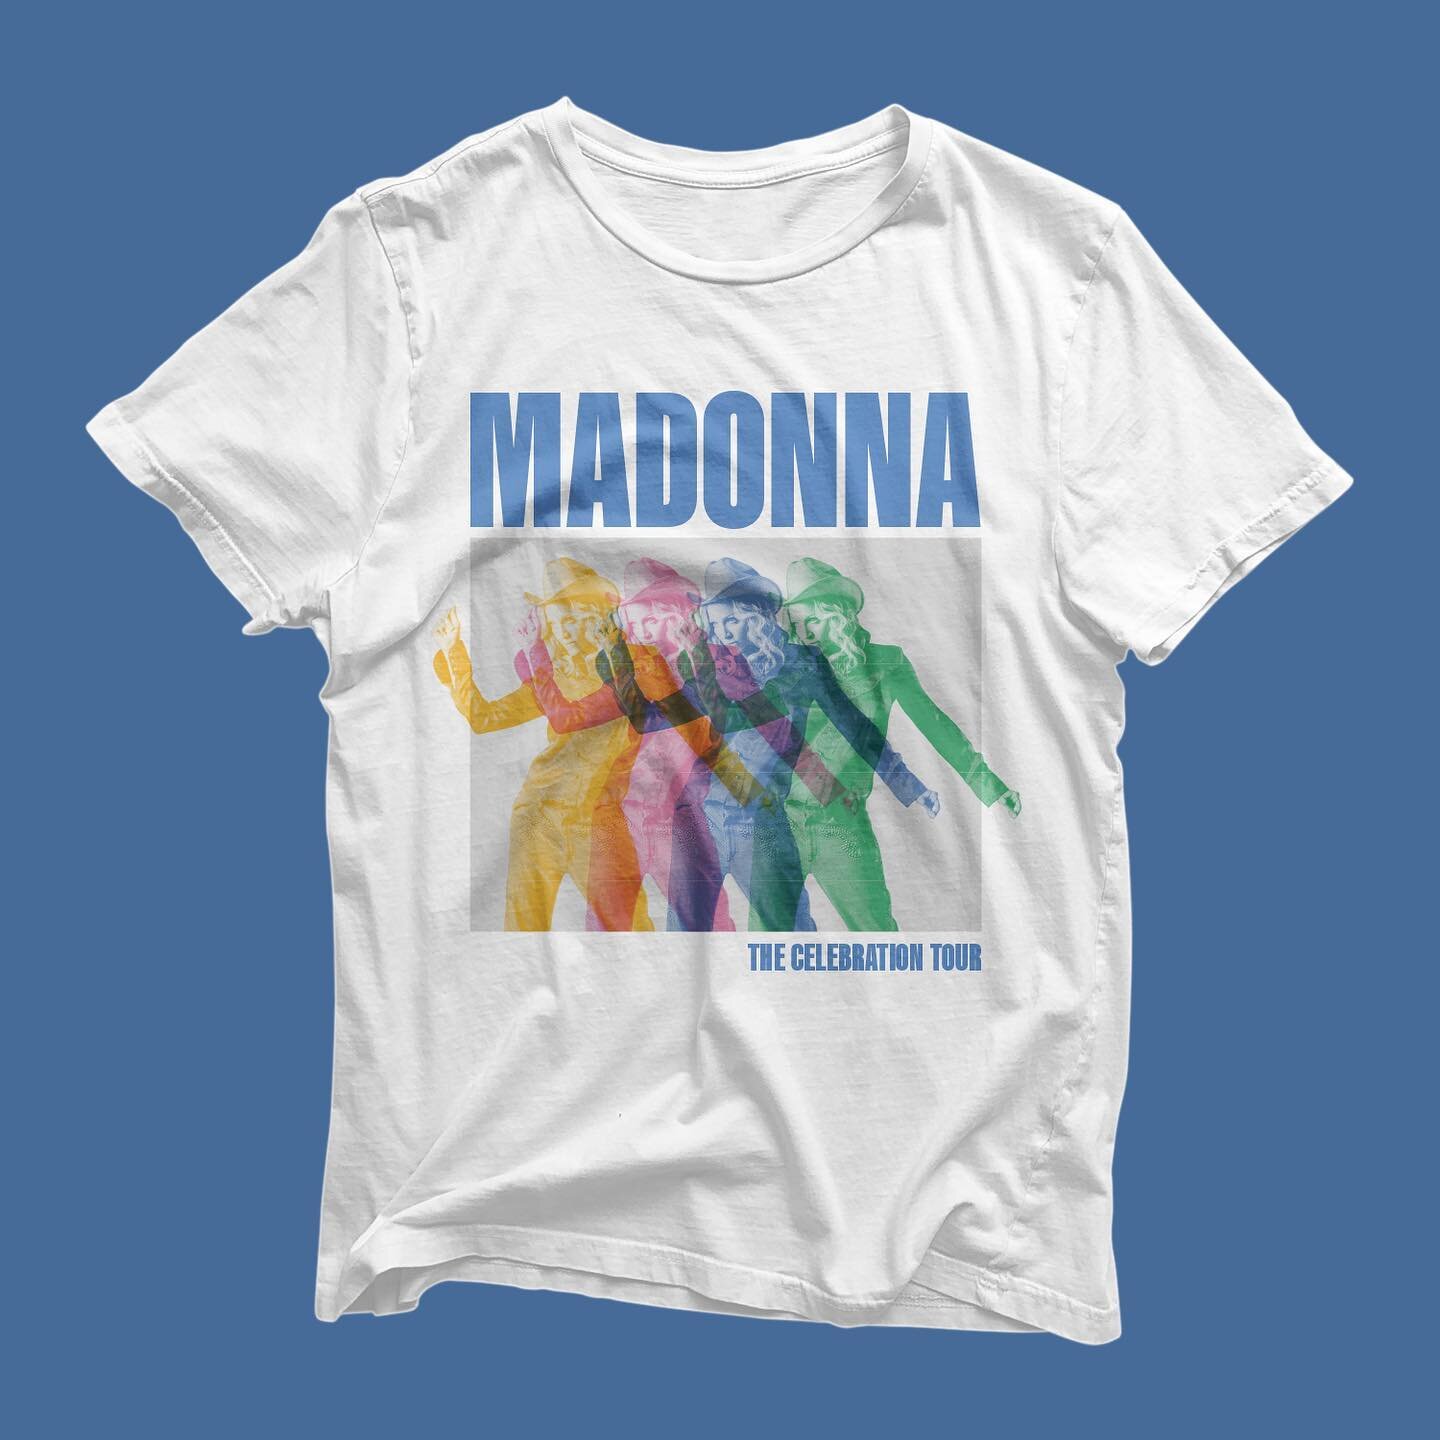 &ldquo;Universe is full of stars&hellip;&rdquo; here&rsquo;s a colorful take on @madonna&rsquo;s Music era. Would you pair this with some denim and cowboy boots? 

#madonna #madonnamerchandise #concerttee #tourmerch #madonnafans #madonnacelebrationto